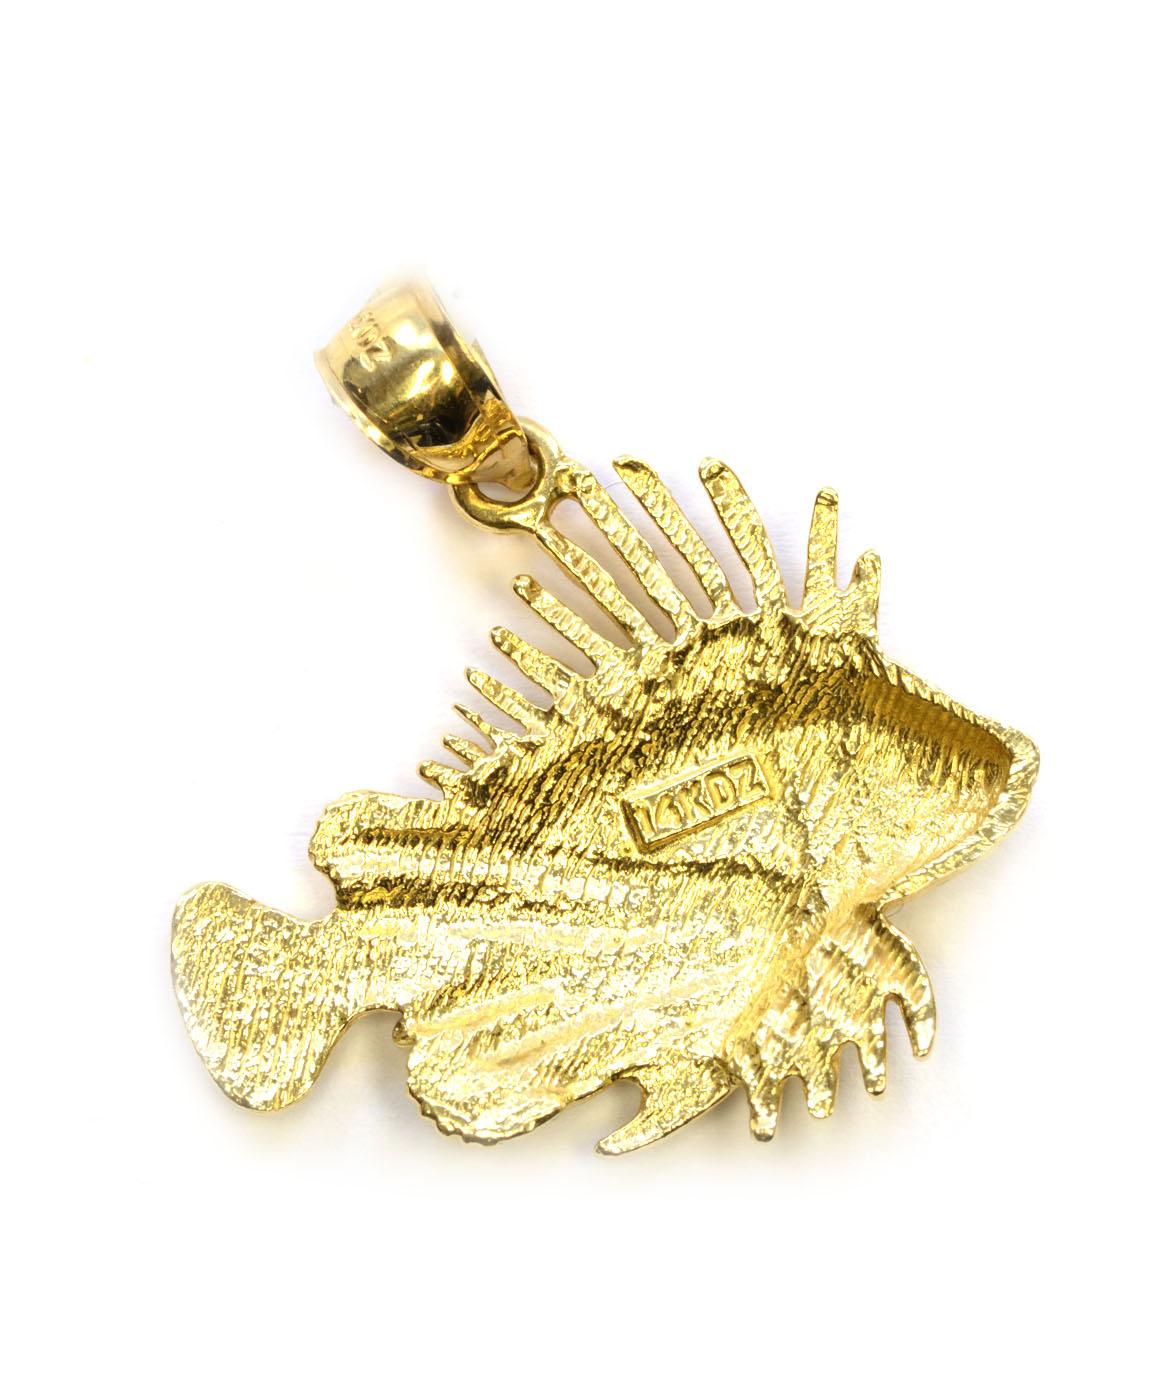 Solid 14K Yellow Gold Tropical Fish Pendant/ Charm 4.2 grams 

This pendant measures about 1.25 inches including bail, by 1.125 inches long. Please see photos for details! 